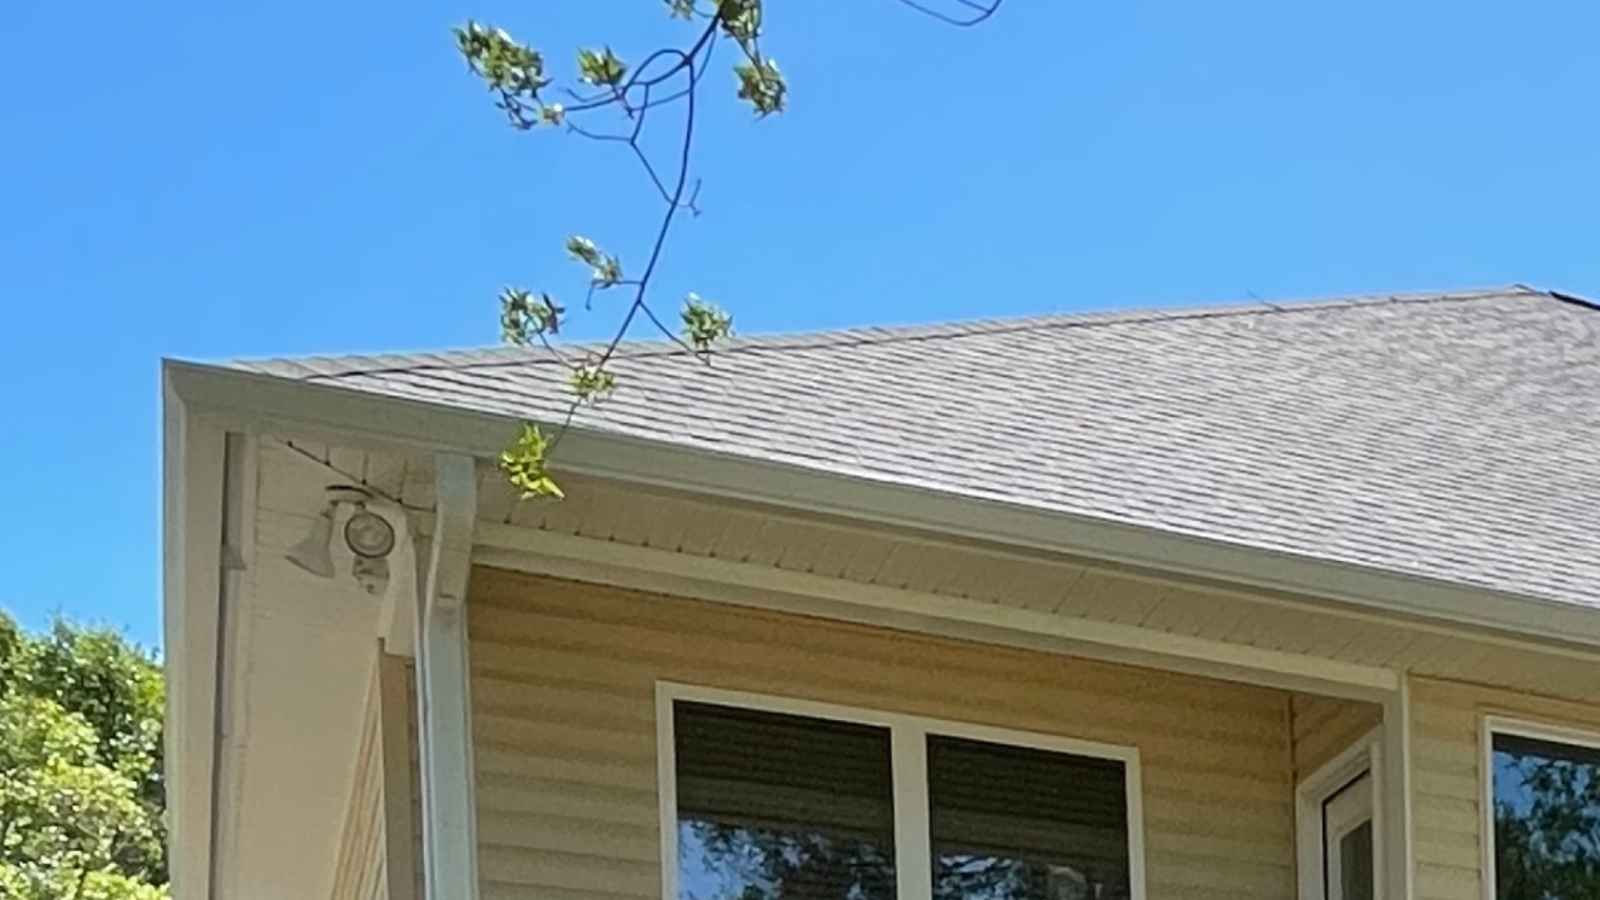 White color metal rain roof gutter with holes